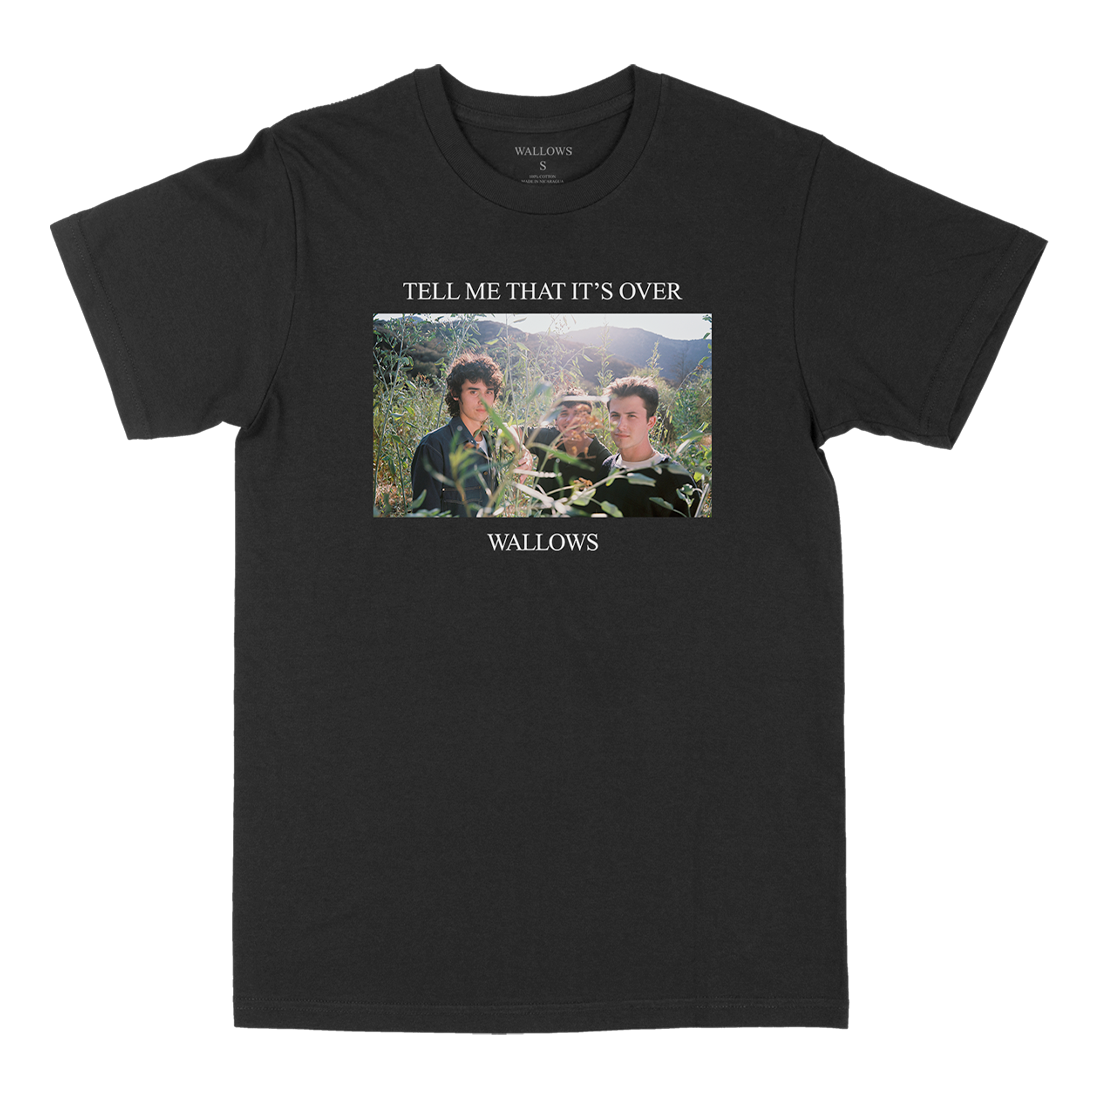 'TELL ME THAT IT'S OVER' (CD & T-Shirt Collectable Box Set)